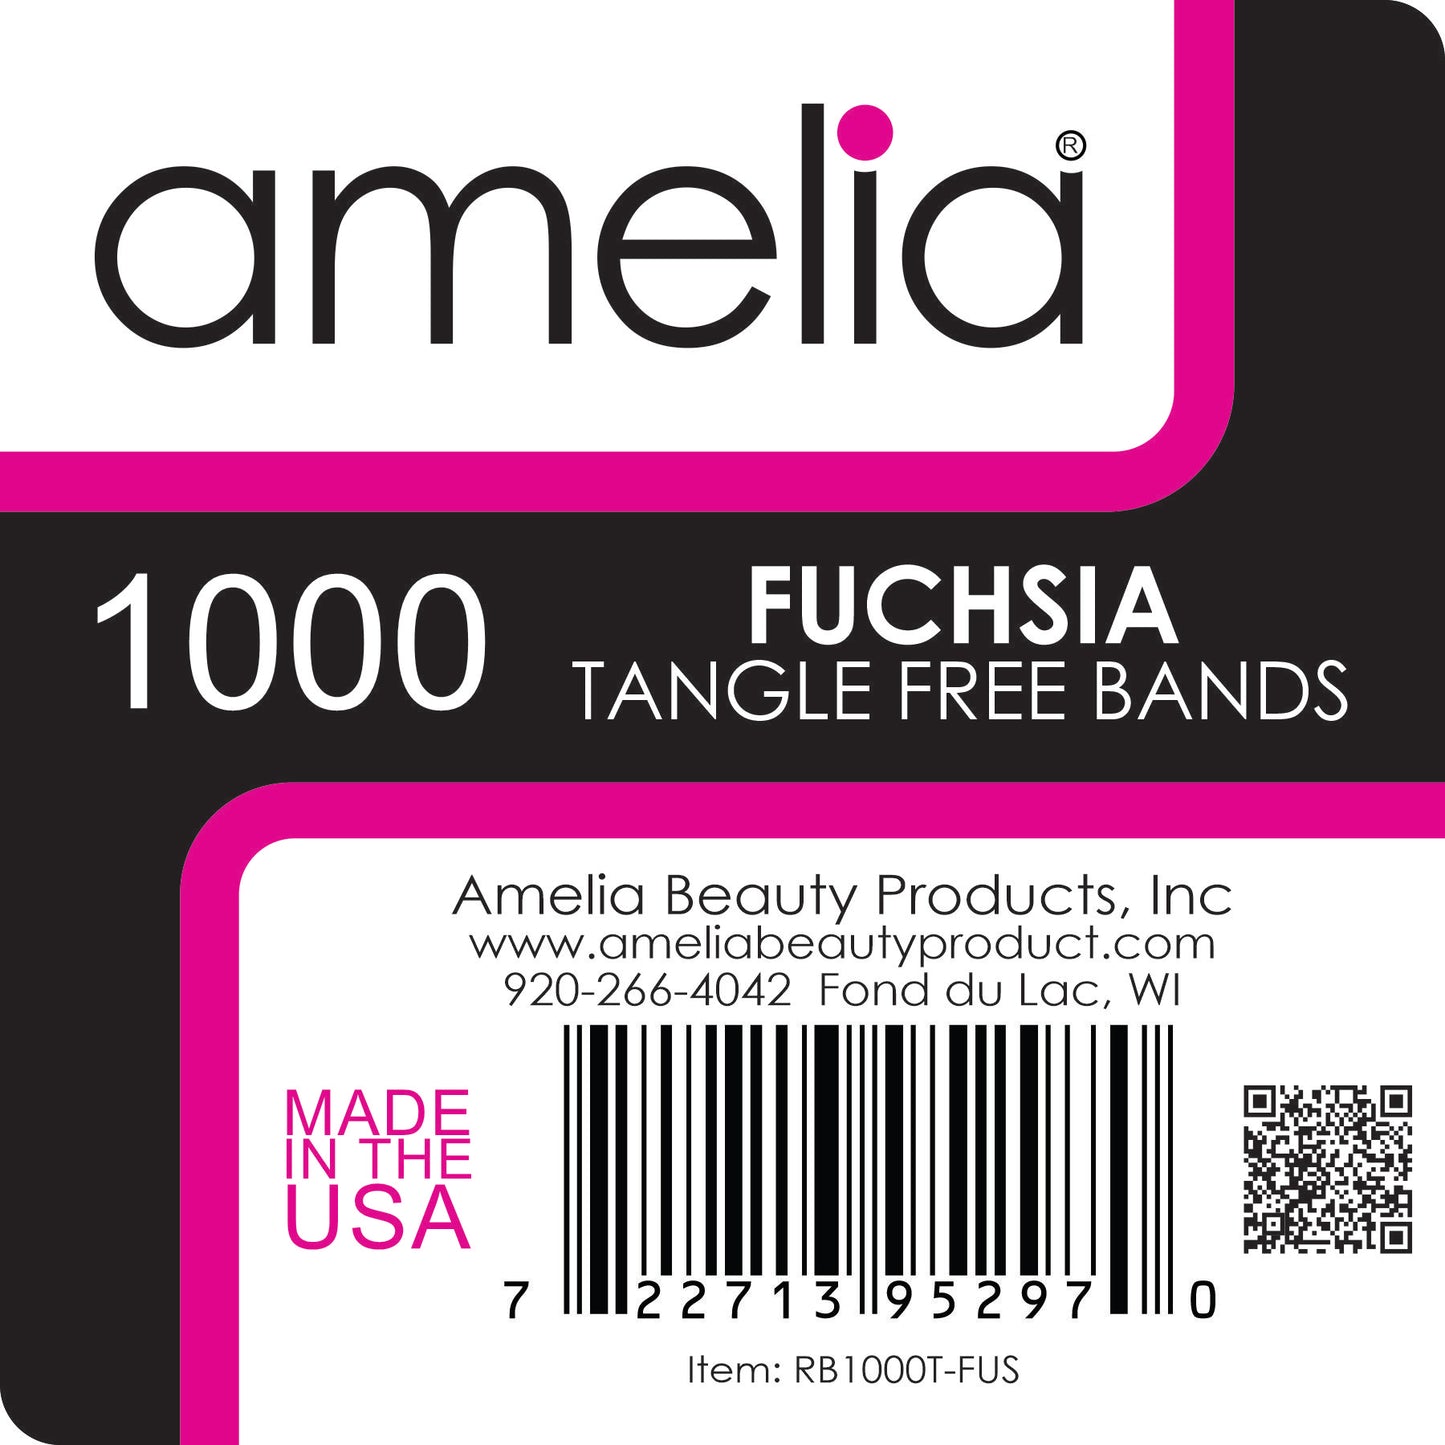 Amelia Beauty | 1/2in, Fuchsia, Tangle Free Elastic Pony Tail Holders | Made in USA, Ideal for Ponytails, Braids, Twists. For Women, Girls. Pain Free, Snag Free, Easy Off | 1000 Pack